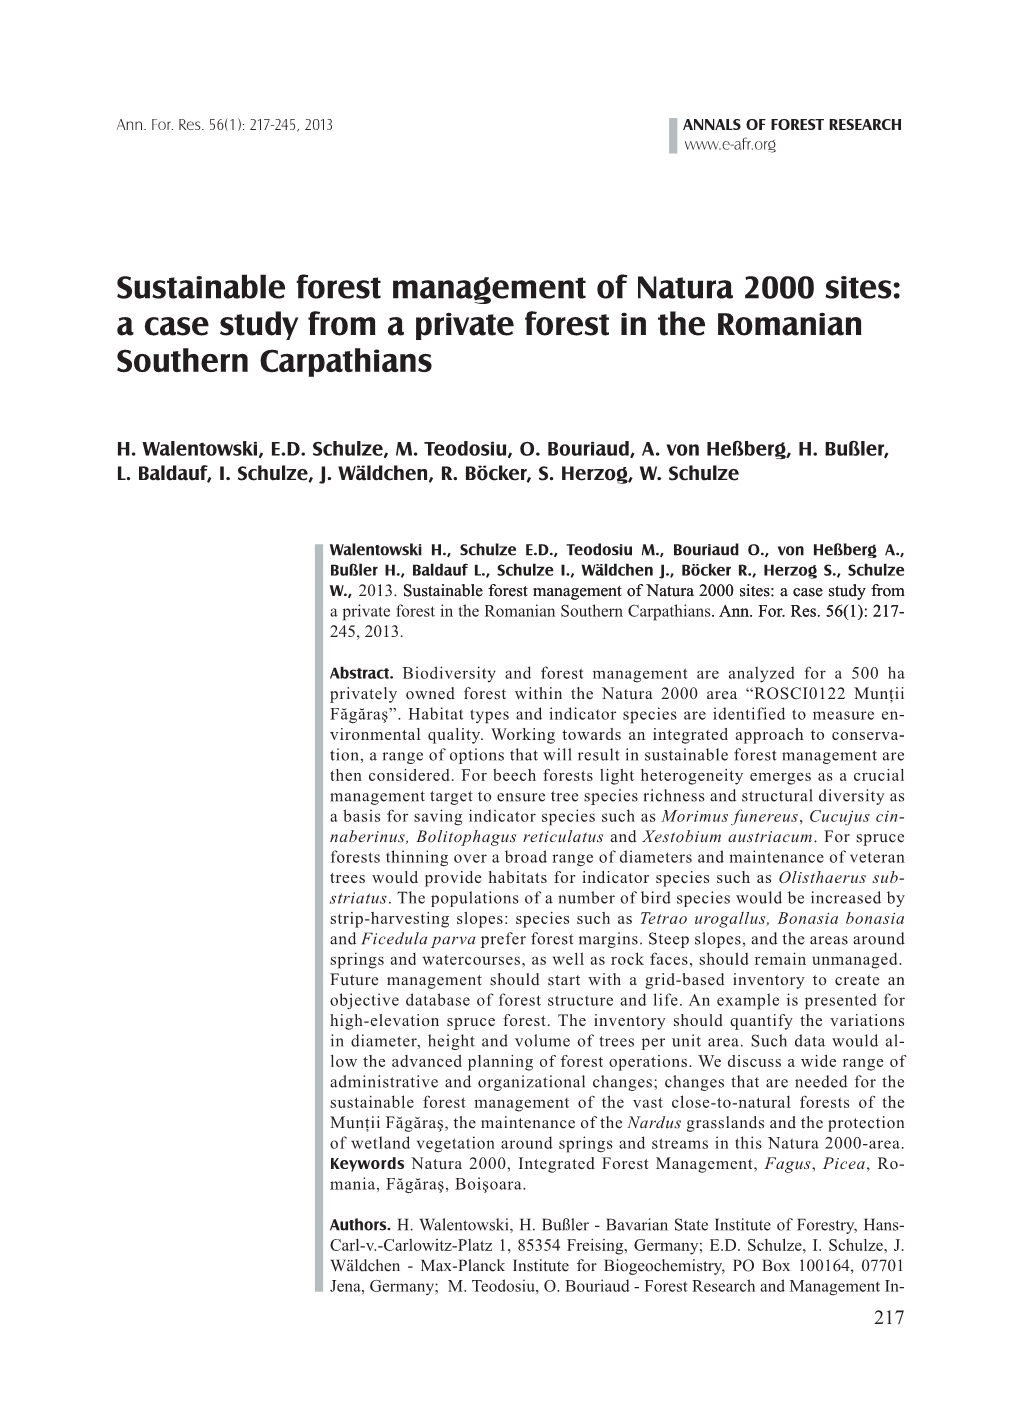 Sustainable Forest Management of Natura 2000 Sites: a Case Study from a Private Forest in the Romanian Southern Carpathians